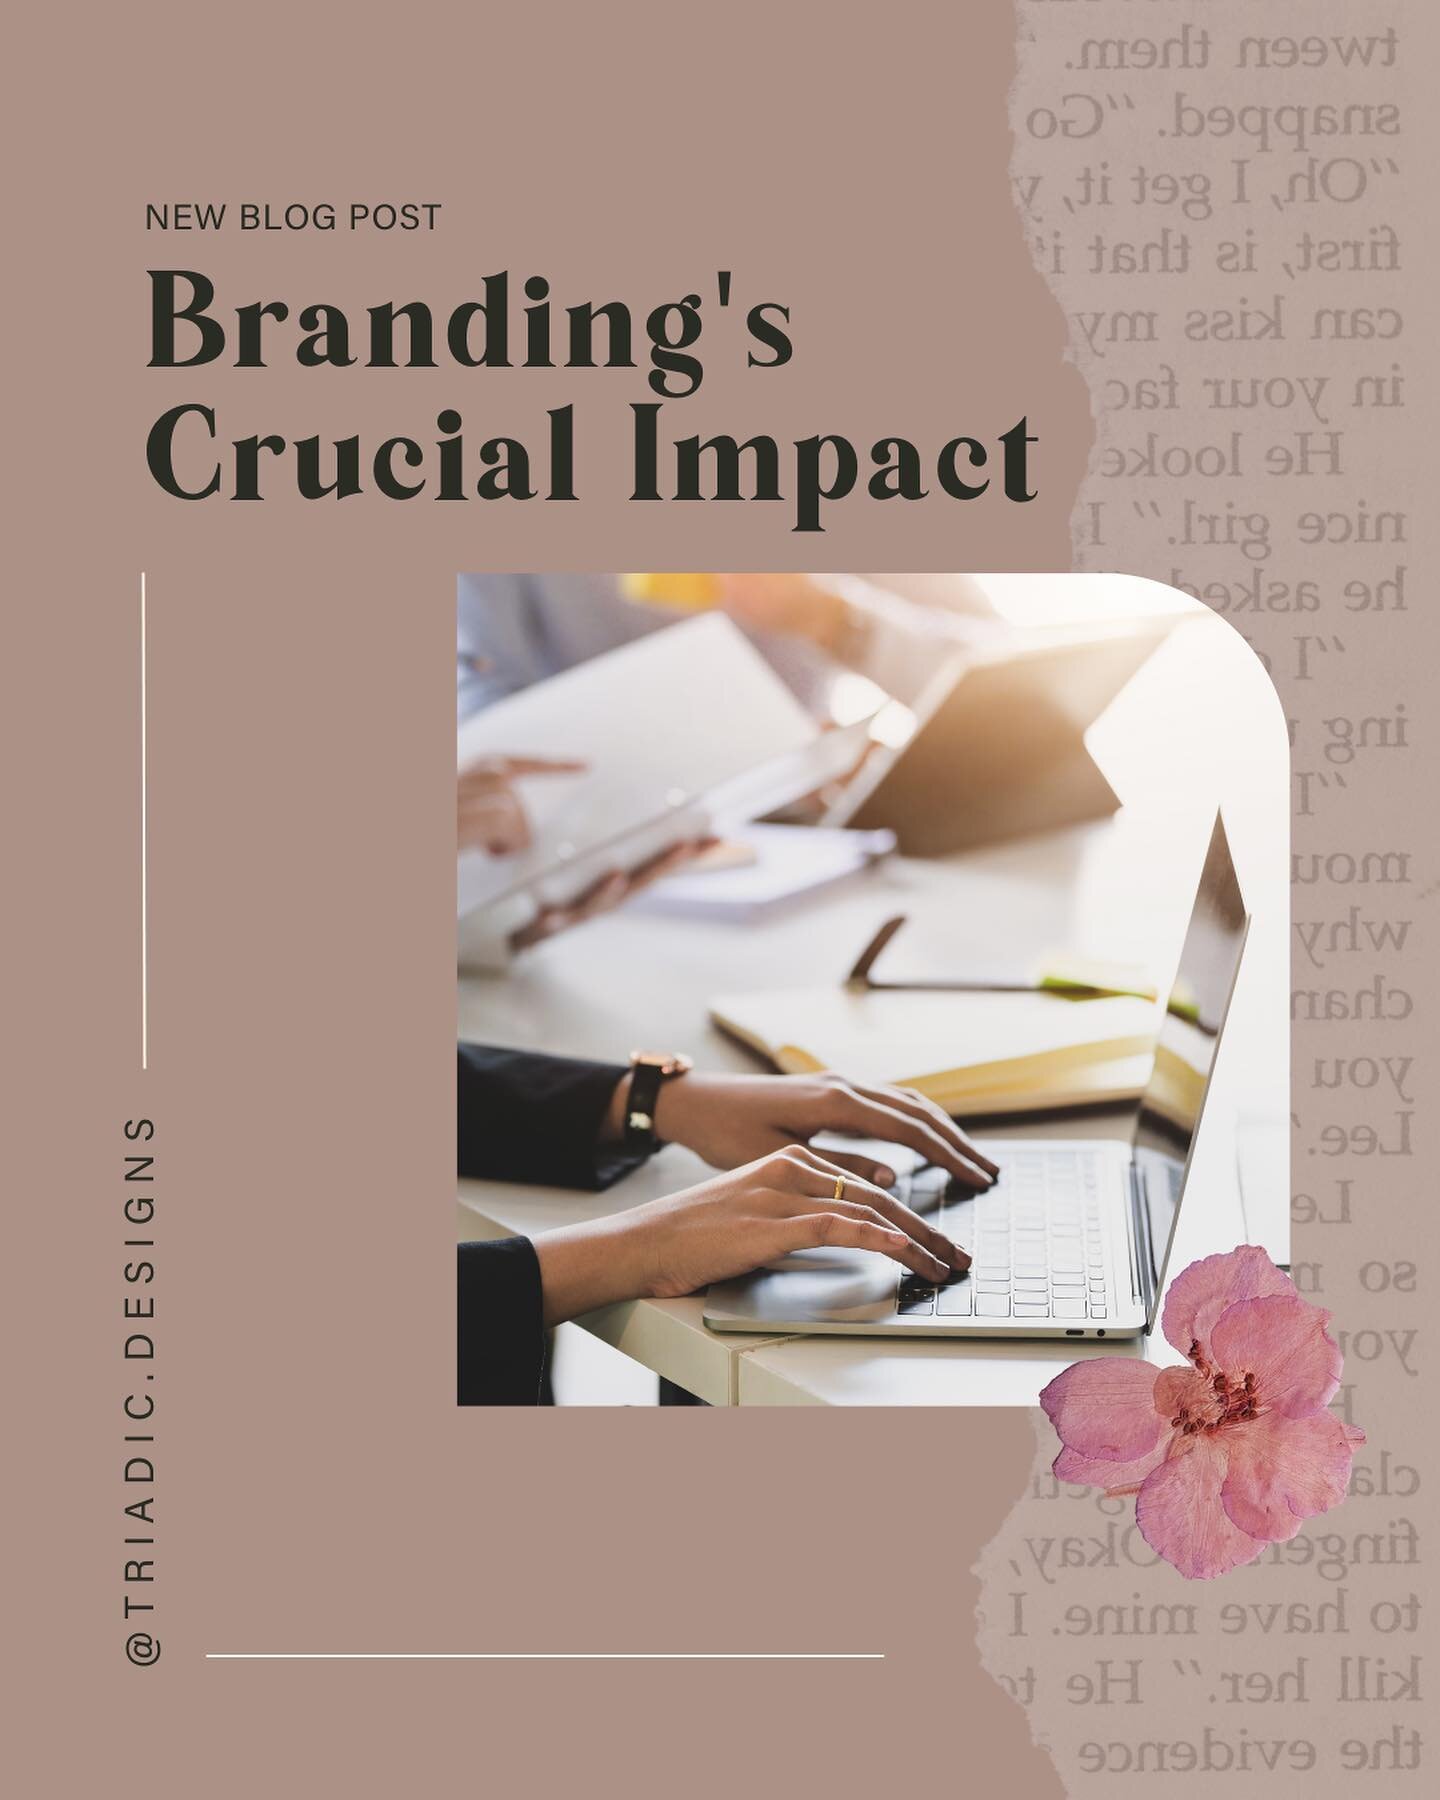 From Ordinary to Extraordinary: Unveiling the Crucial Impact of Branding in Your Journey ✨🌟

Branding goes far beyond a logo or tagline - encompassing your business's entire experience and perception is key.

In our new blog post, we highlight these